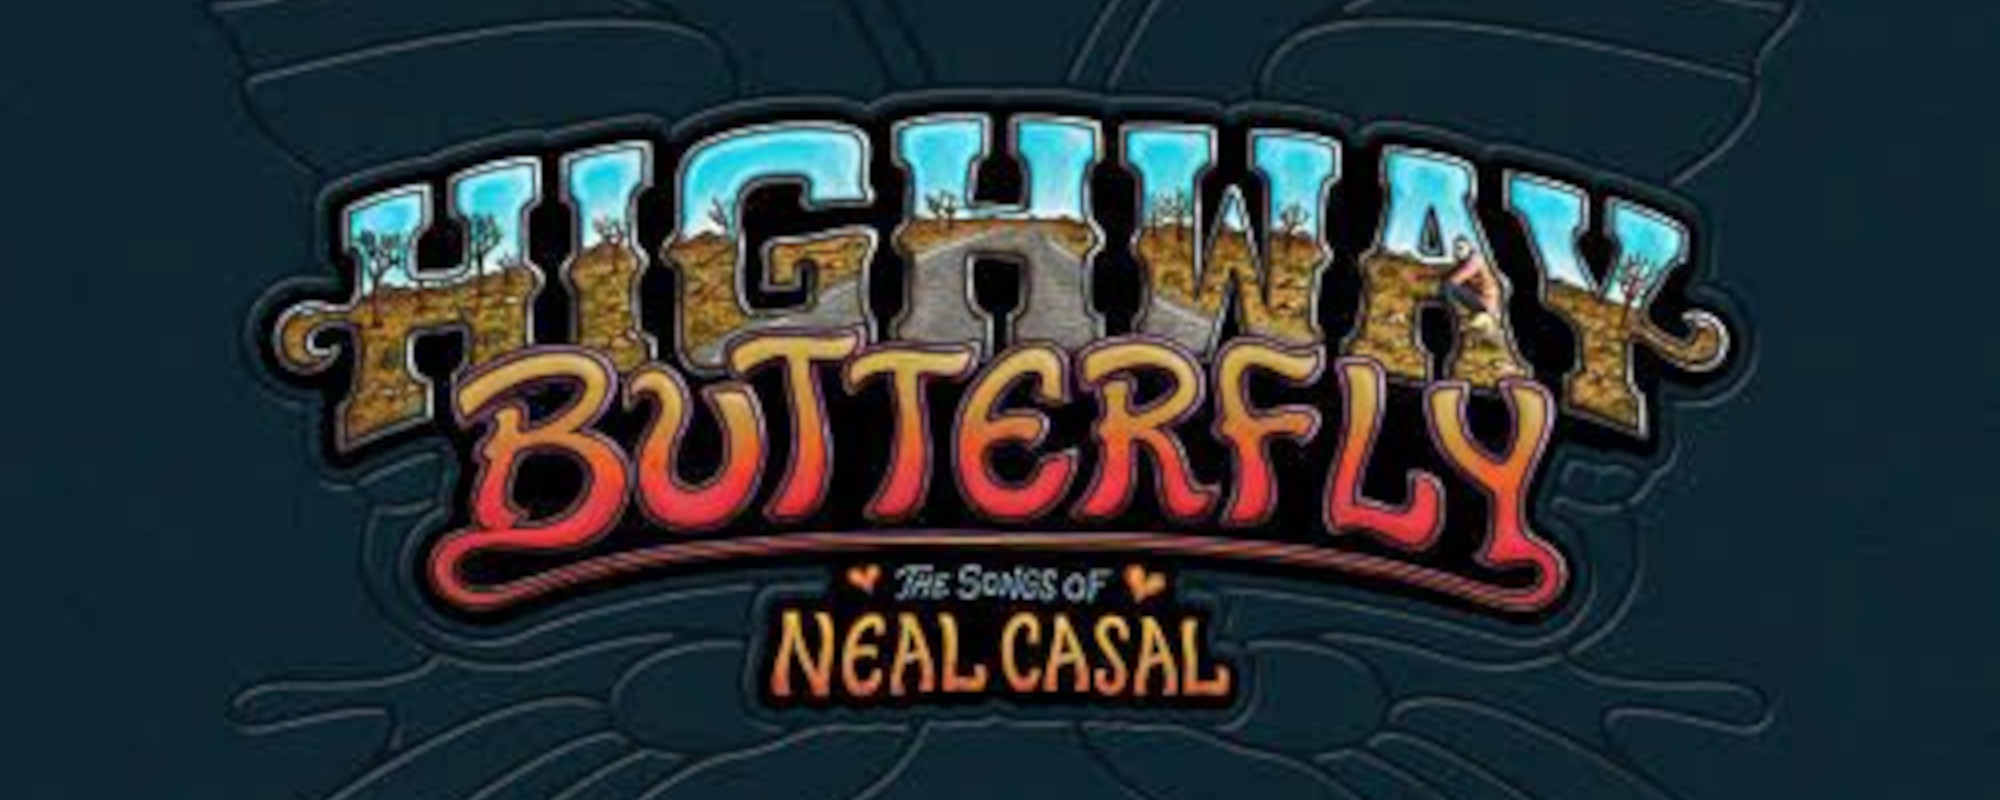 Review: Various Artists’ ‘Highway Butterfly: The Songs of Neal Casal’